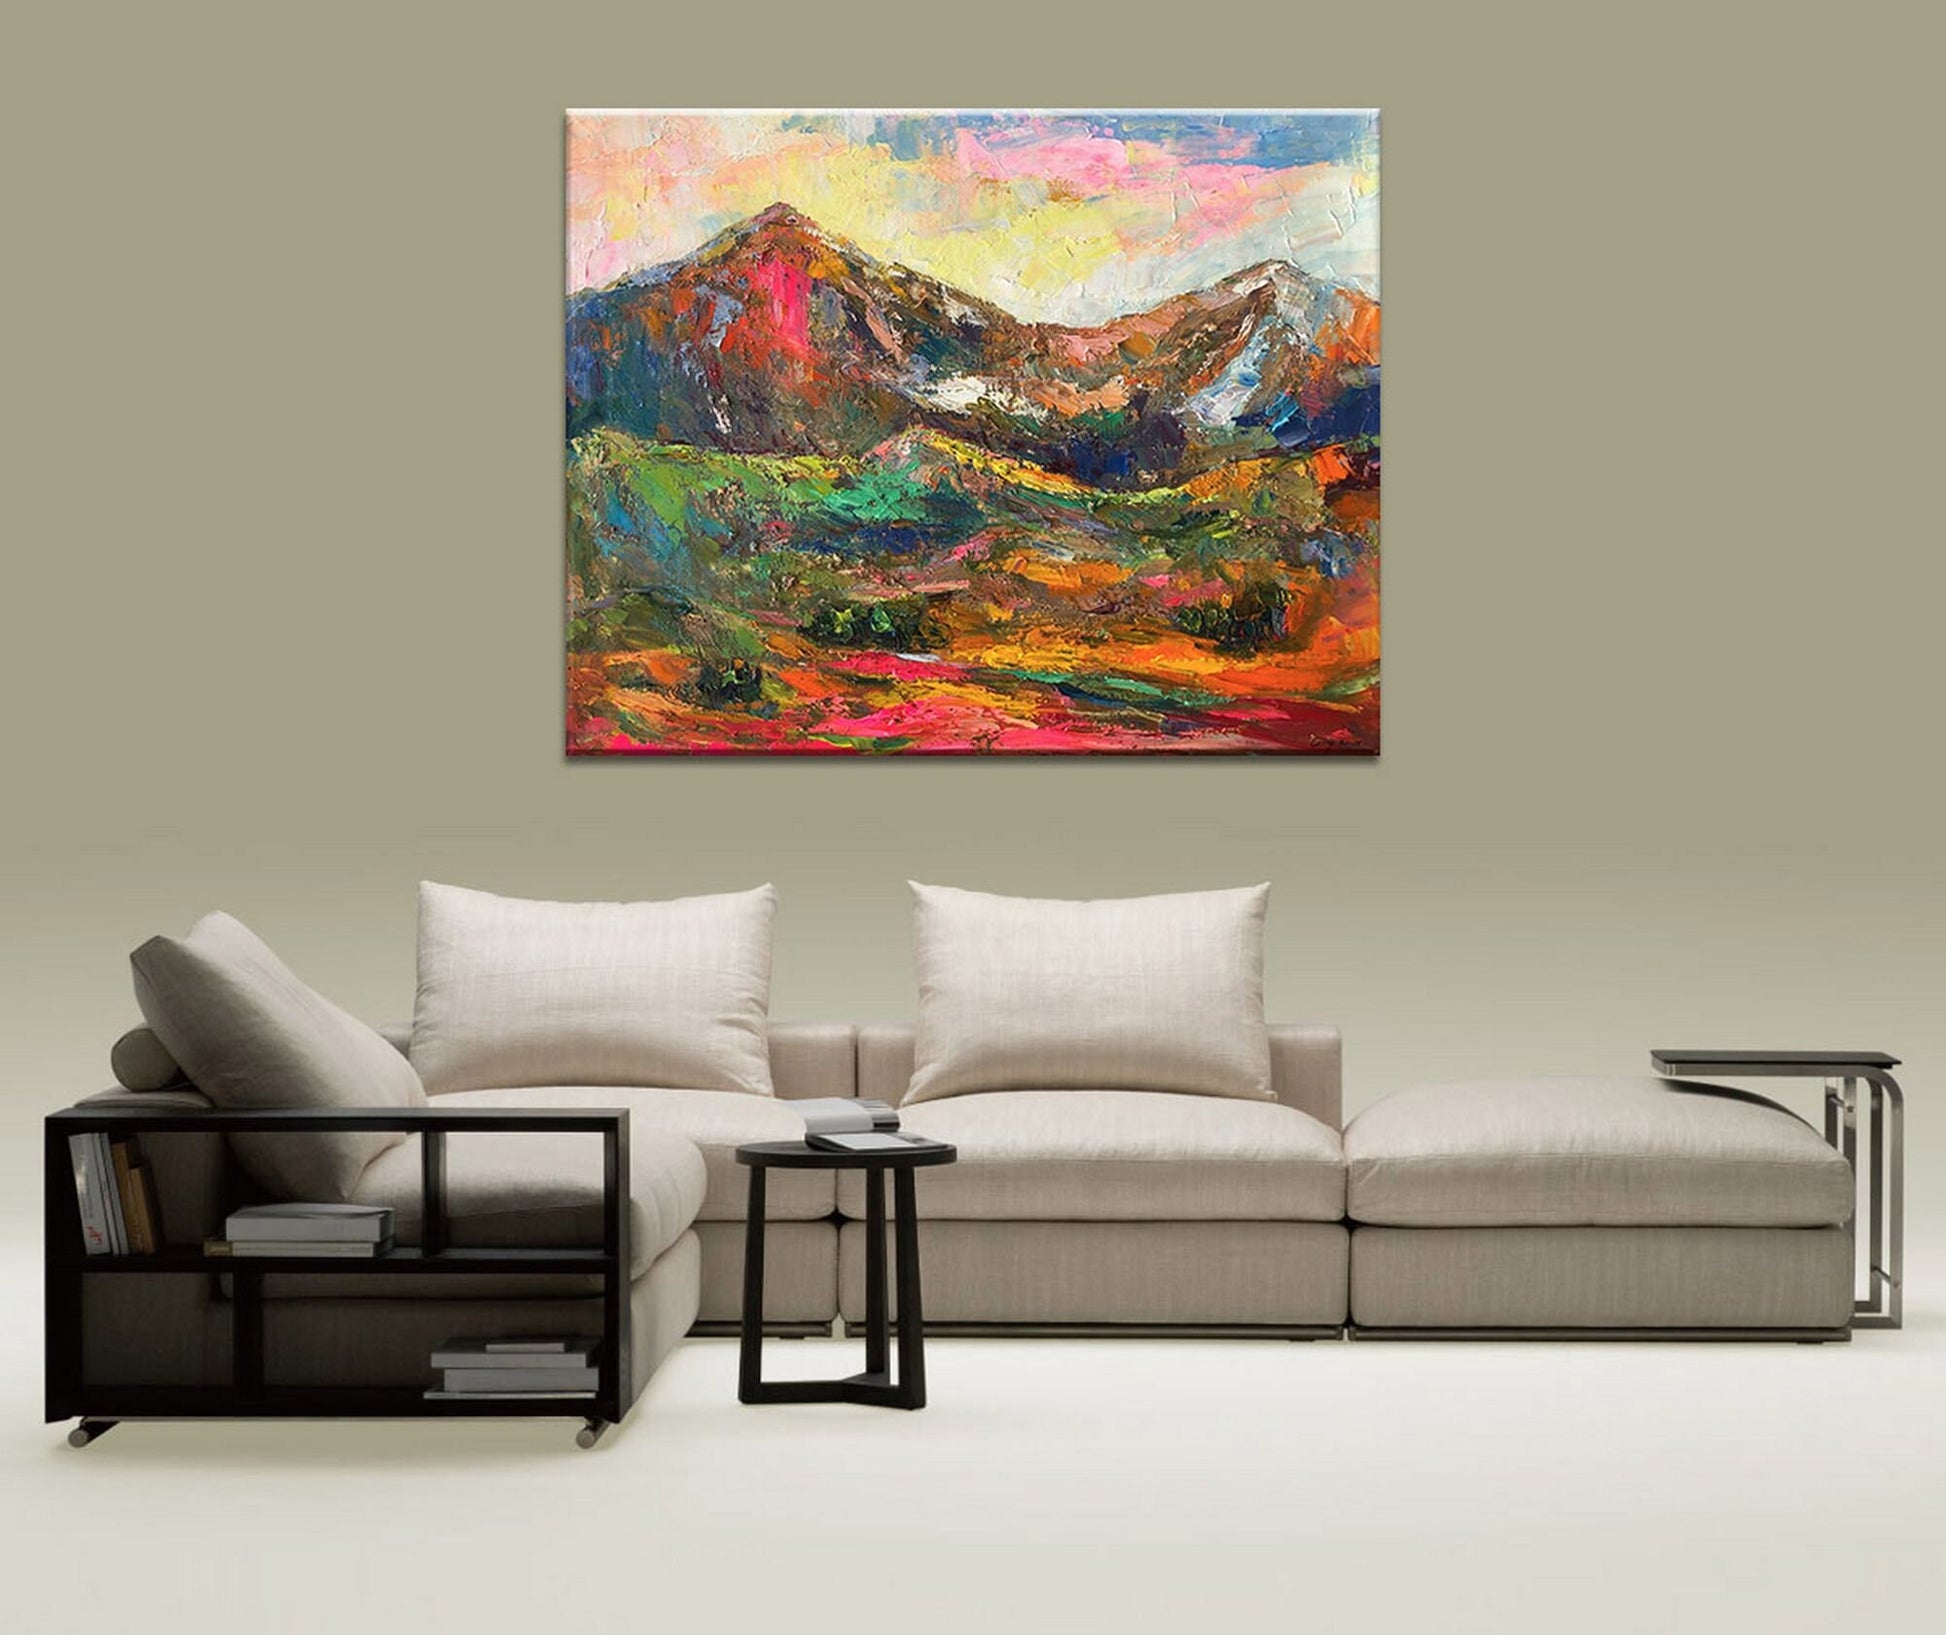 Abstract Painting, Large Canvas Art, Oil Painting, Canvas Painting, Abstract Art, Large Painting On Canvas, Contemporary Art, Original Art